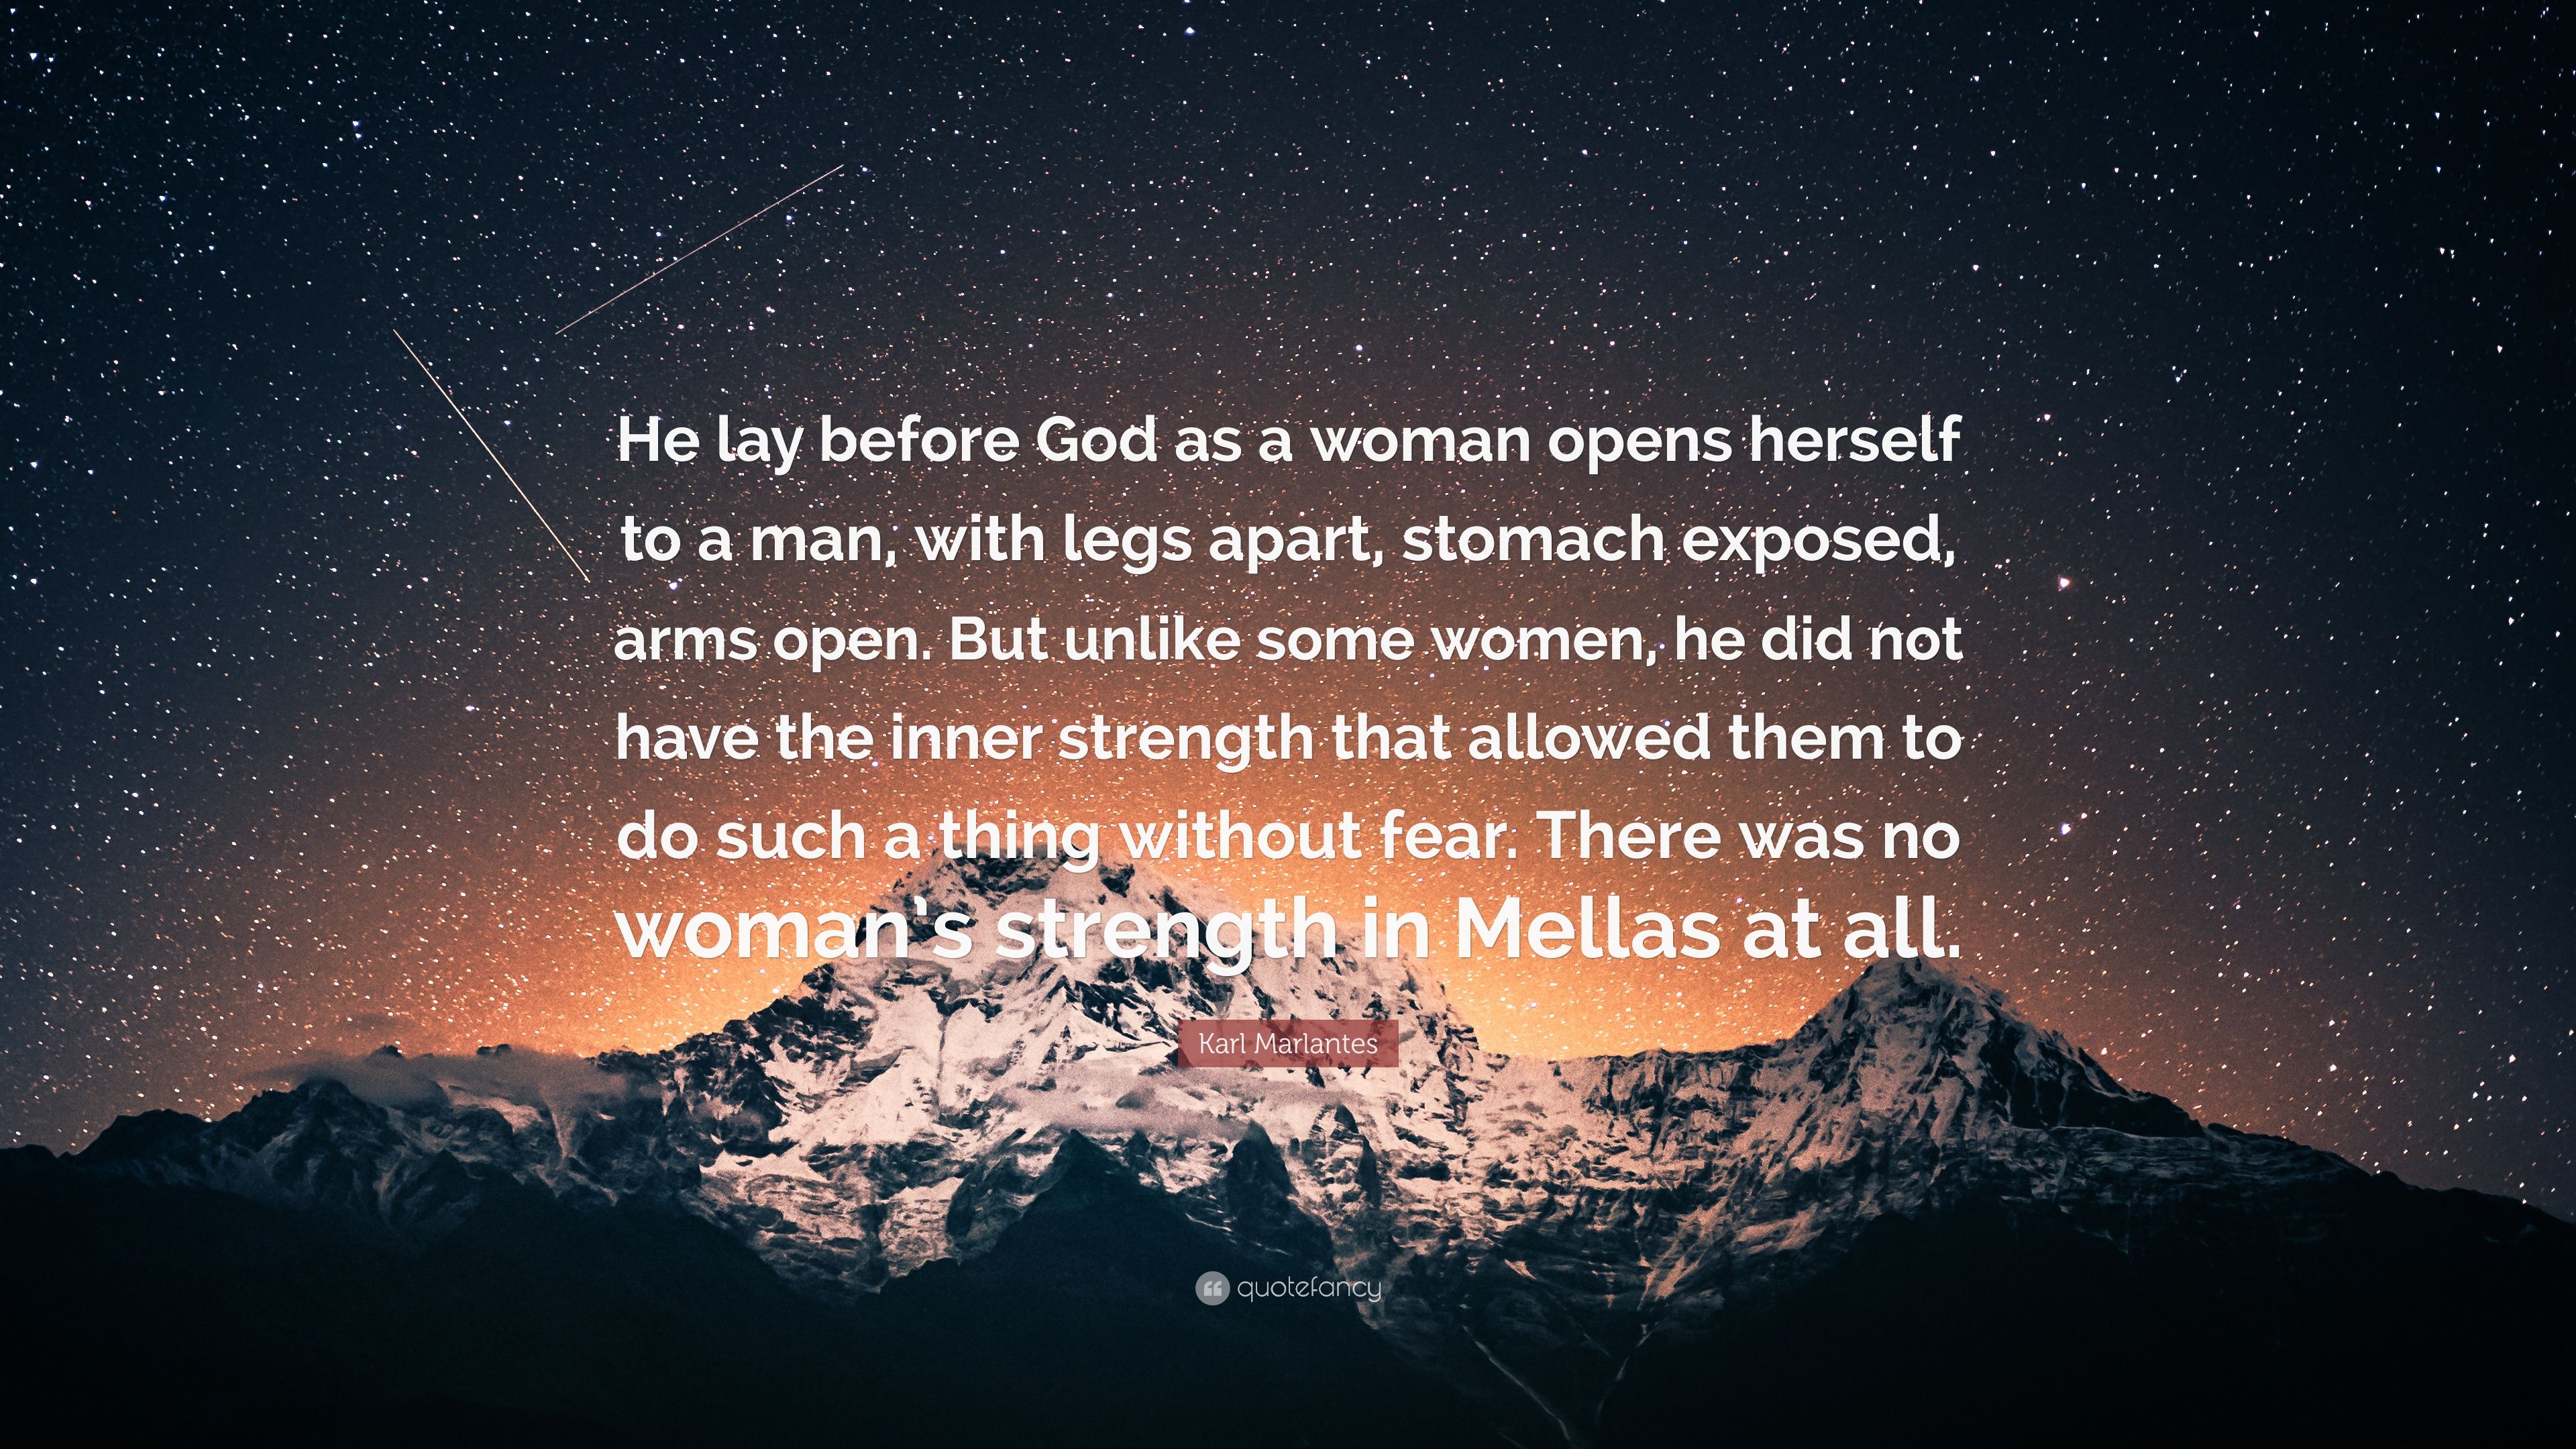 Karl Marlantes Quote: “He lay before God as a woman opens herself to